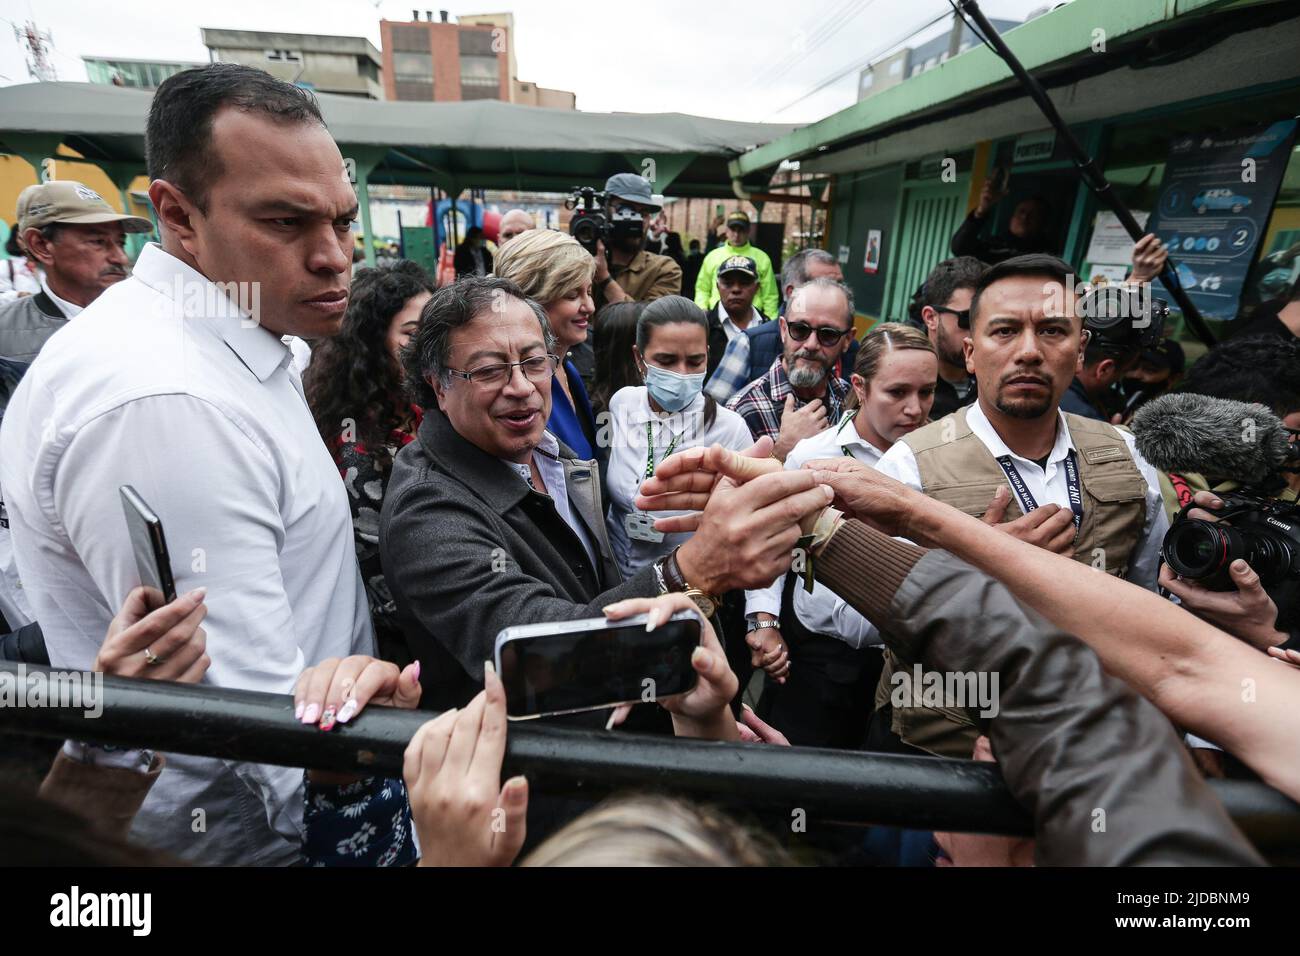 Bogota, Colombia. 19th June, 2022. Gustavo Petro (2nd L front), presidential candidate of the leftist Historic Pact for Colombia coalition, shakes hands with supporters at a polling station in Bogota, Colombia, June 19, 2022. Gustavo Petro was elected president of Colombia on Sunday after defeating independent candidate Rodolfo Hernandez in the second round of elections in a very close race, the state-run National Civil Registry reported. Credit: Jhon Heaver Paz/Xinhua/Alamy Live News Stock Photo